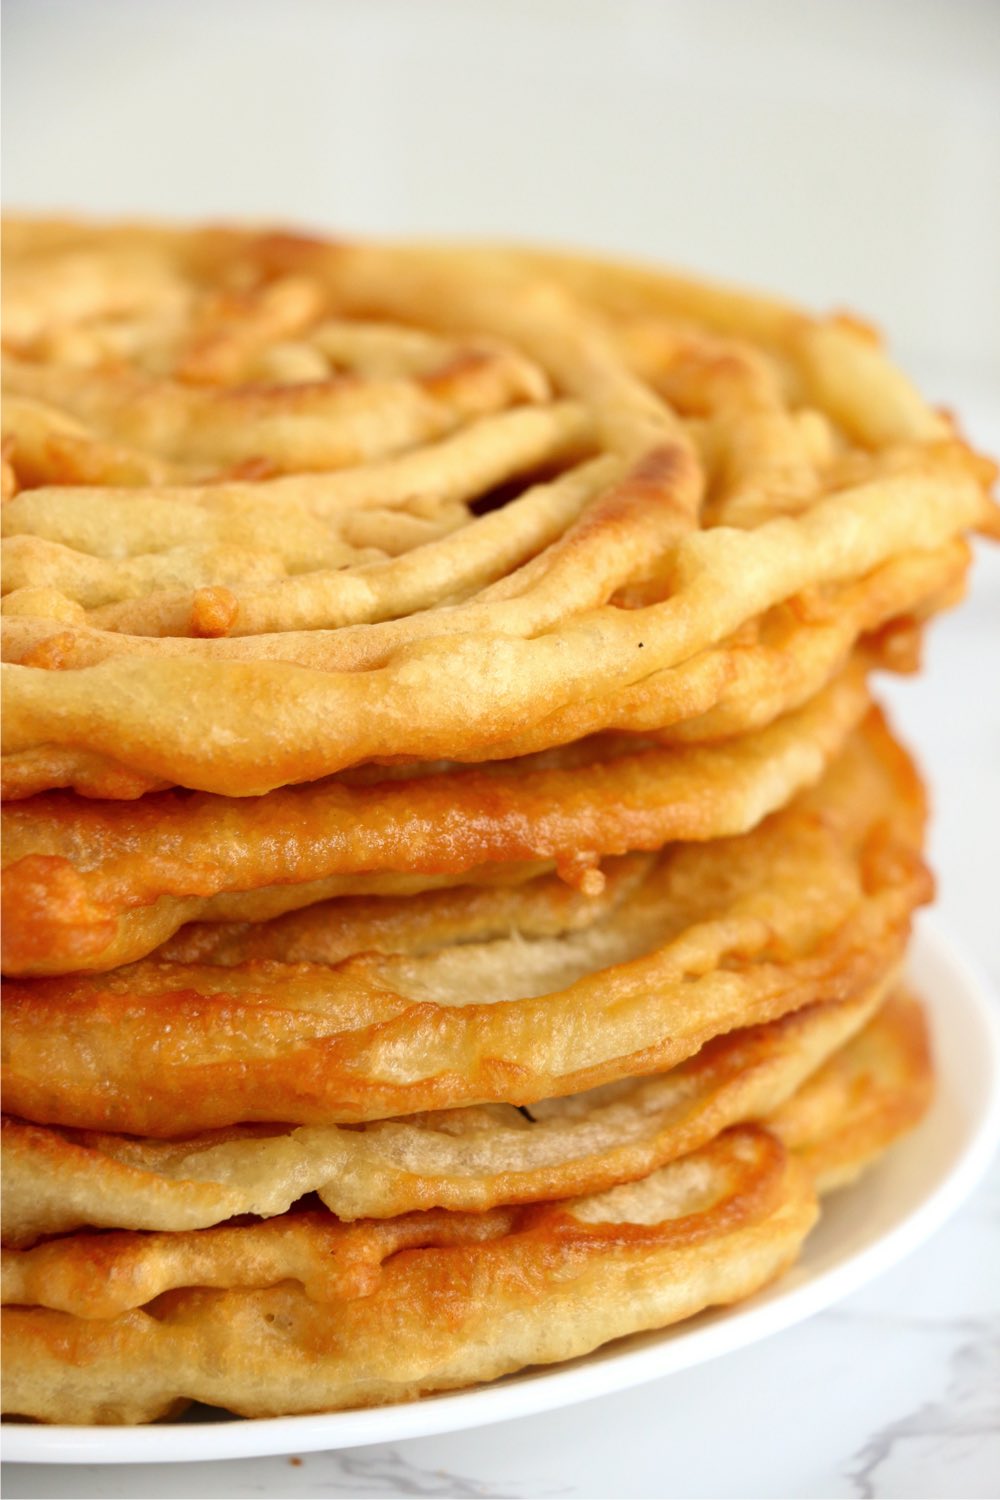 stack of fried funnel cakes